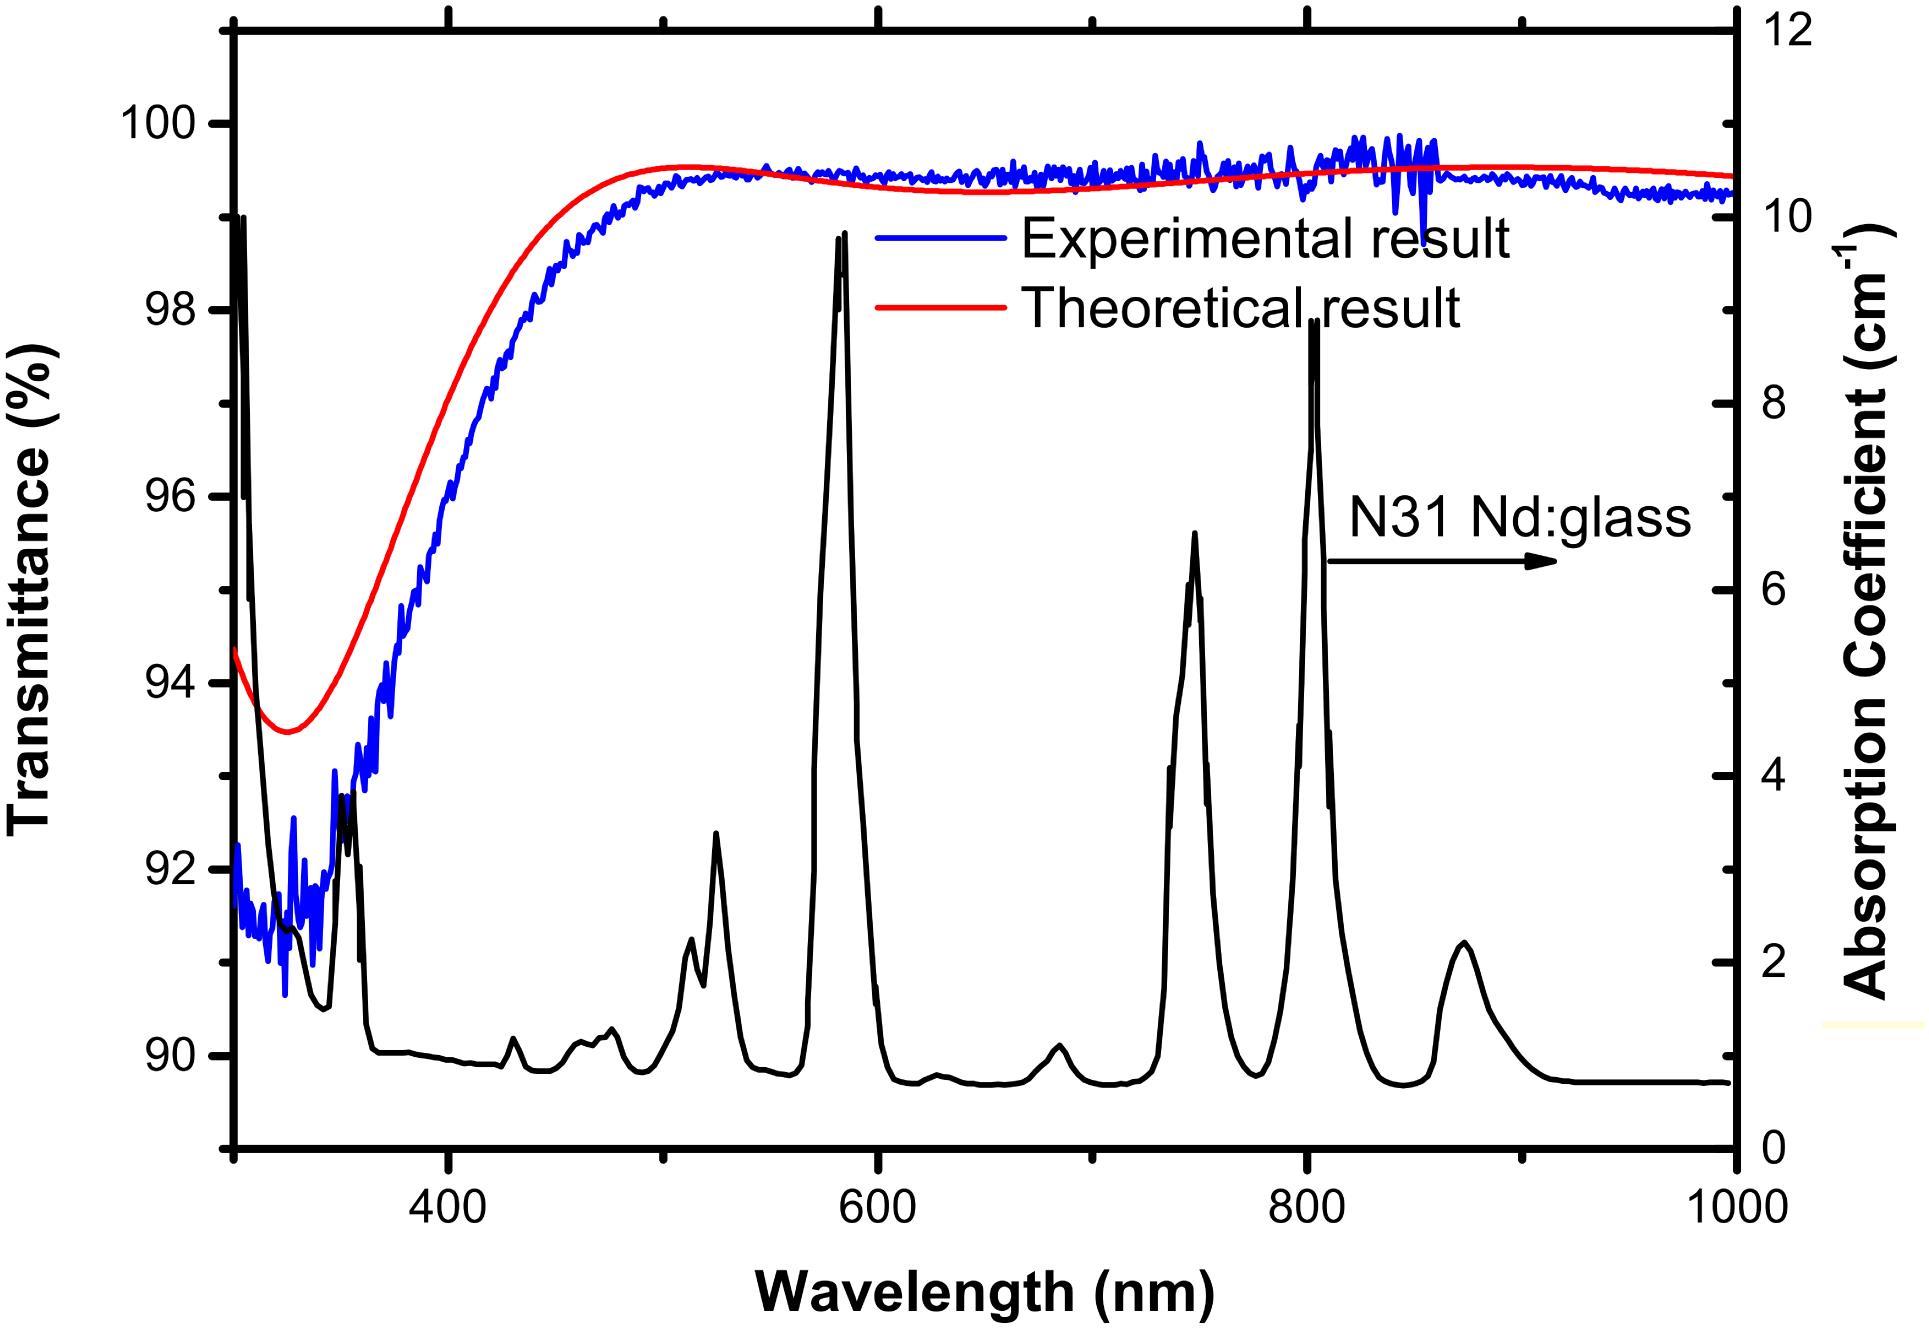 Transmission spectra of ultra-BAC and N31[20] Nd:glass absorption spectra (black curve).